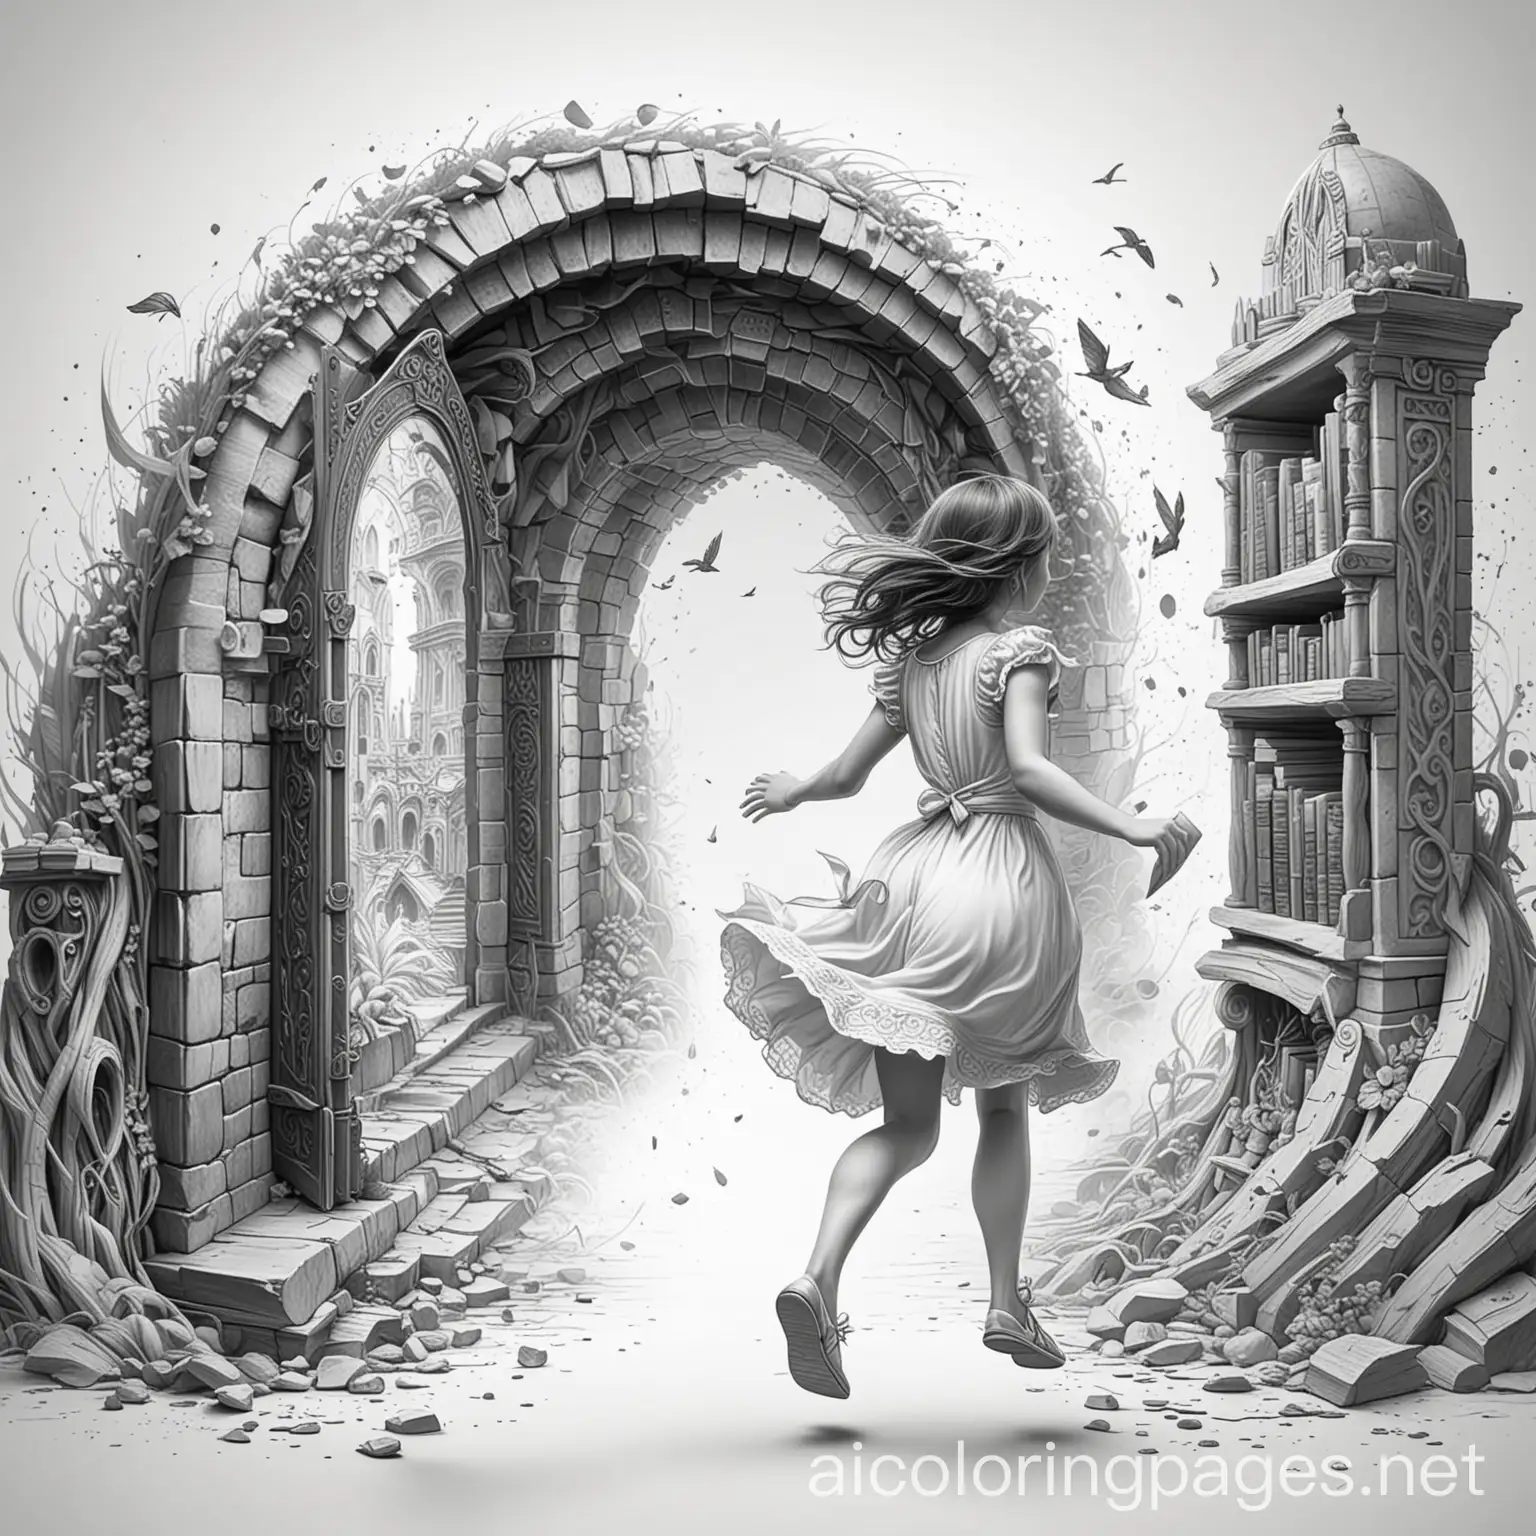 Girl in dress running towards mysterious fantasy book portal, Coloring Page, black and white, line art, white background, Simplicity, Ample White Space. The background of the coloring page is plain white to make it easy for young children to color within the lines. The outlines of all the subjects are easy to distinguish, making it simple for kids to color without too much difficulty